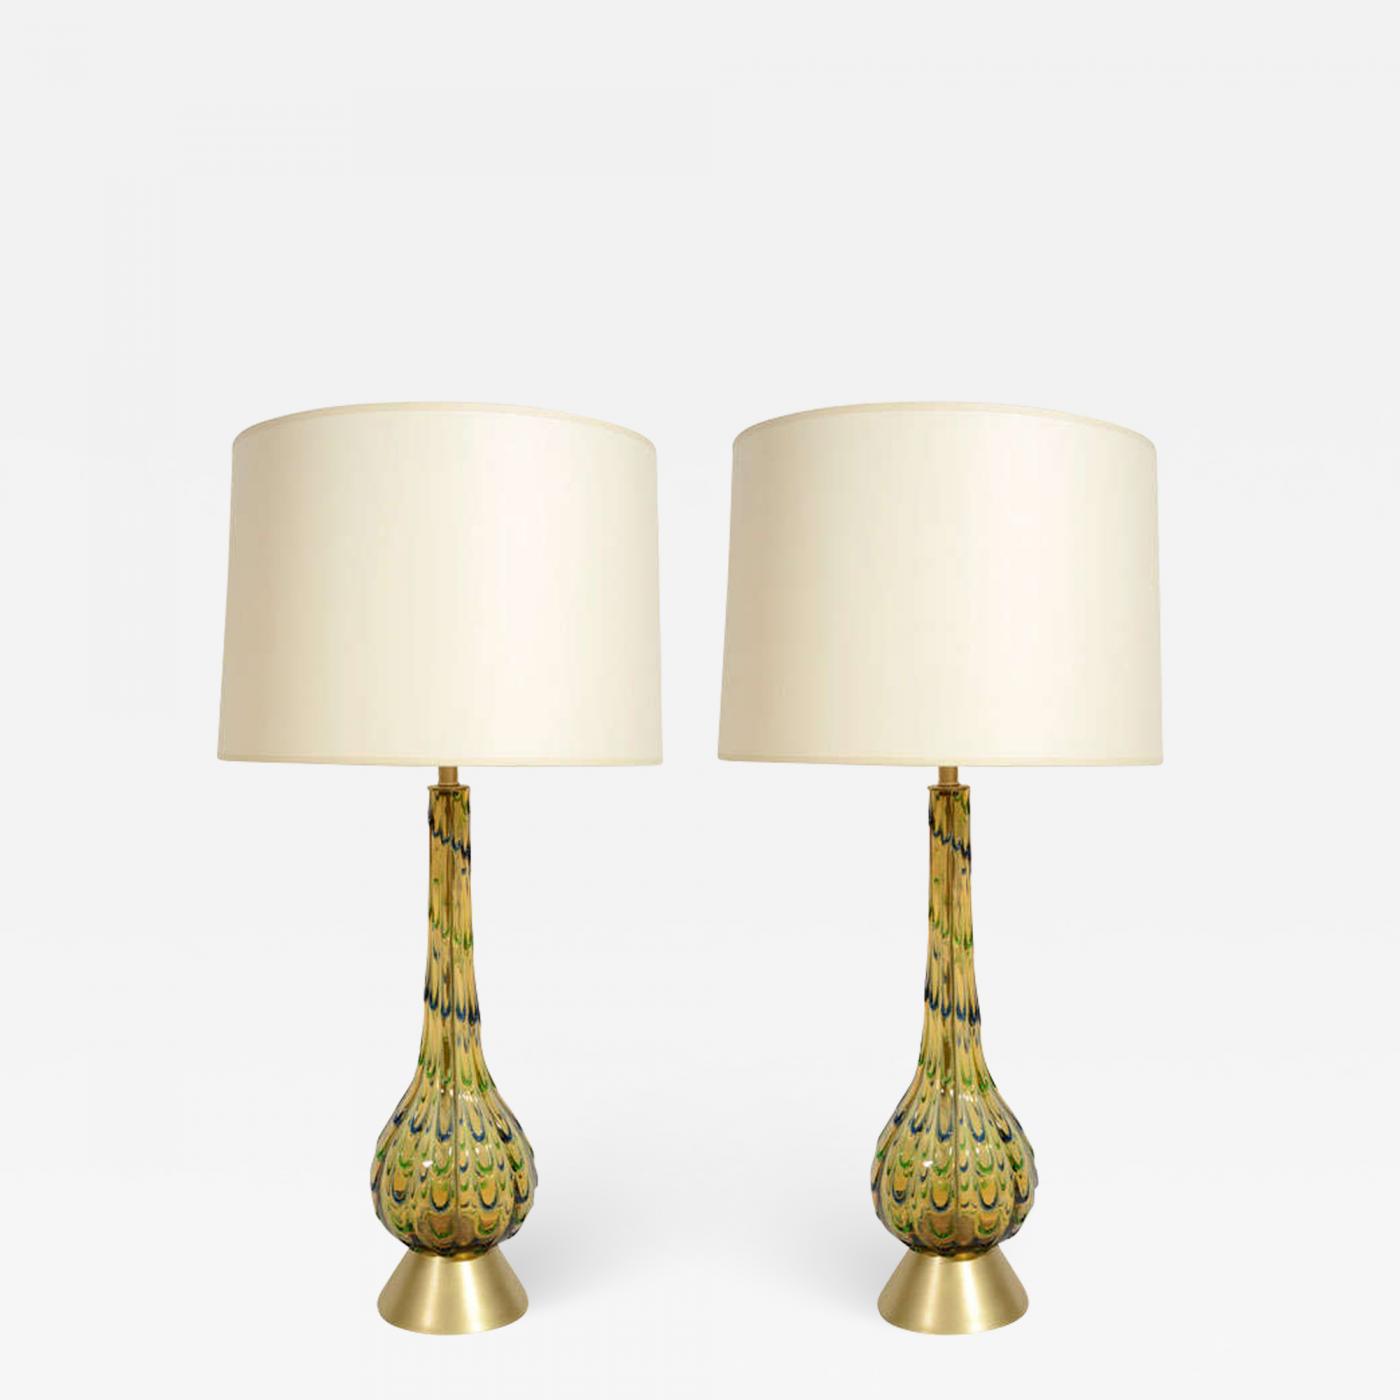 blue green glass table lamps